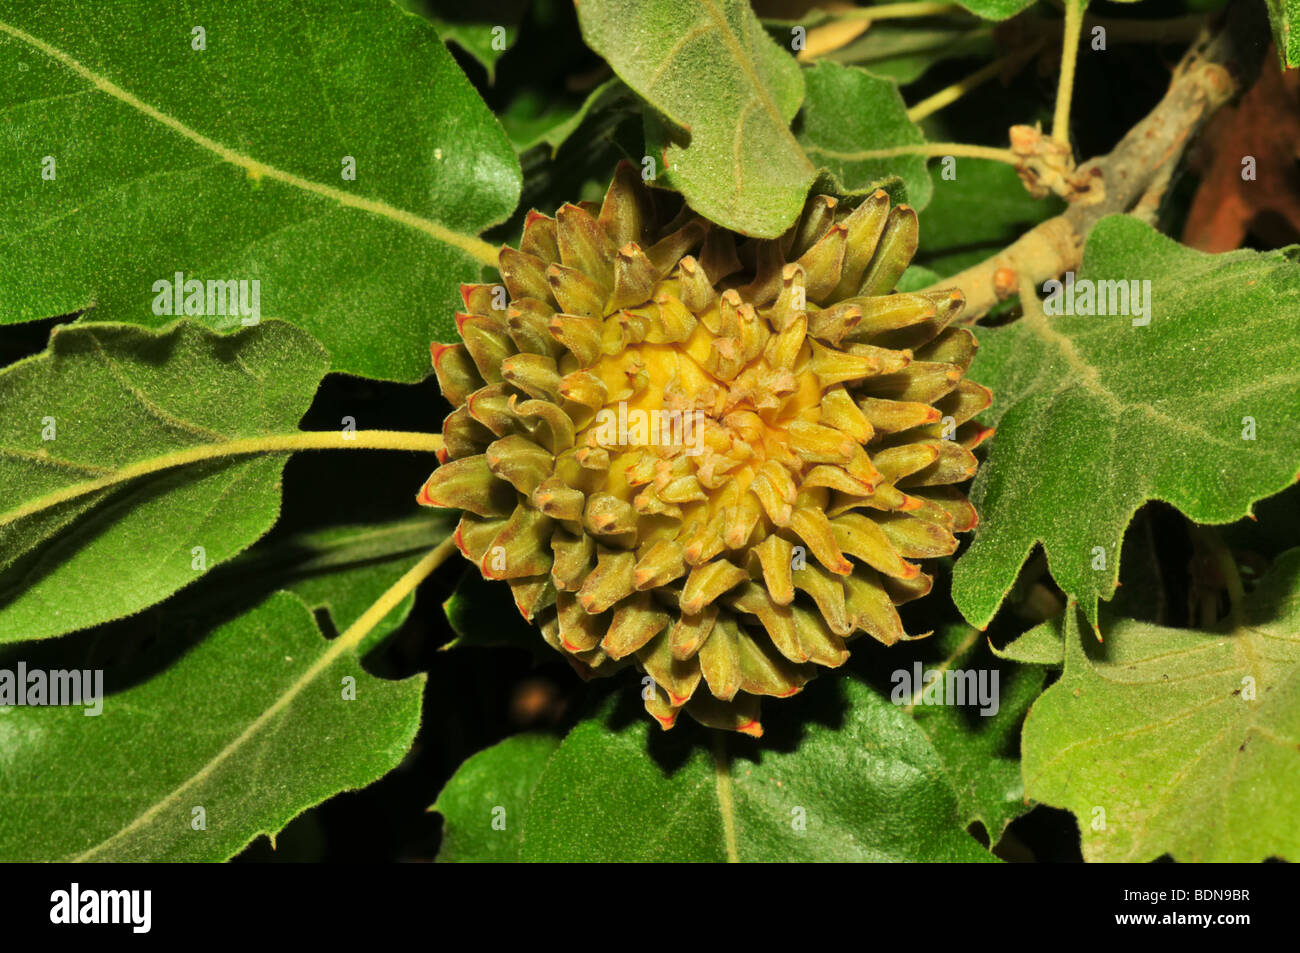 image of oak leaves and acorn (Quercus macrolepis) Stock Photo